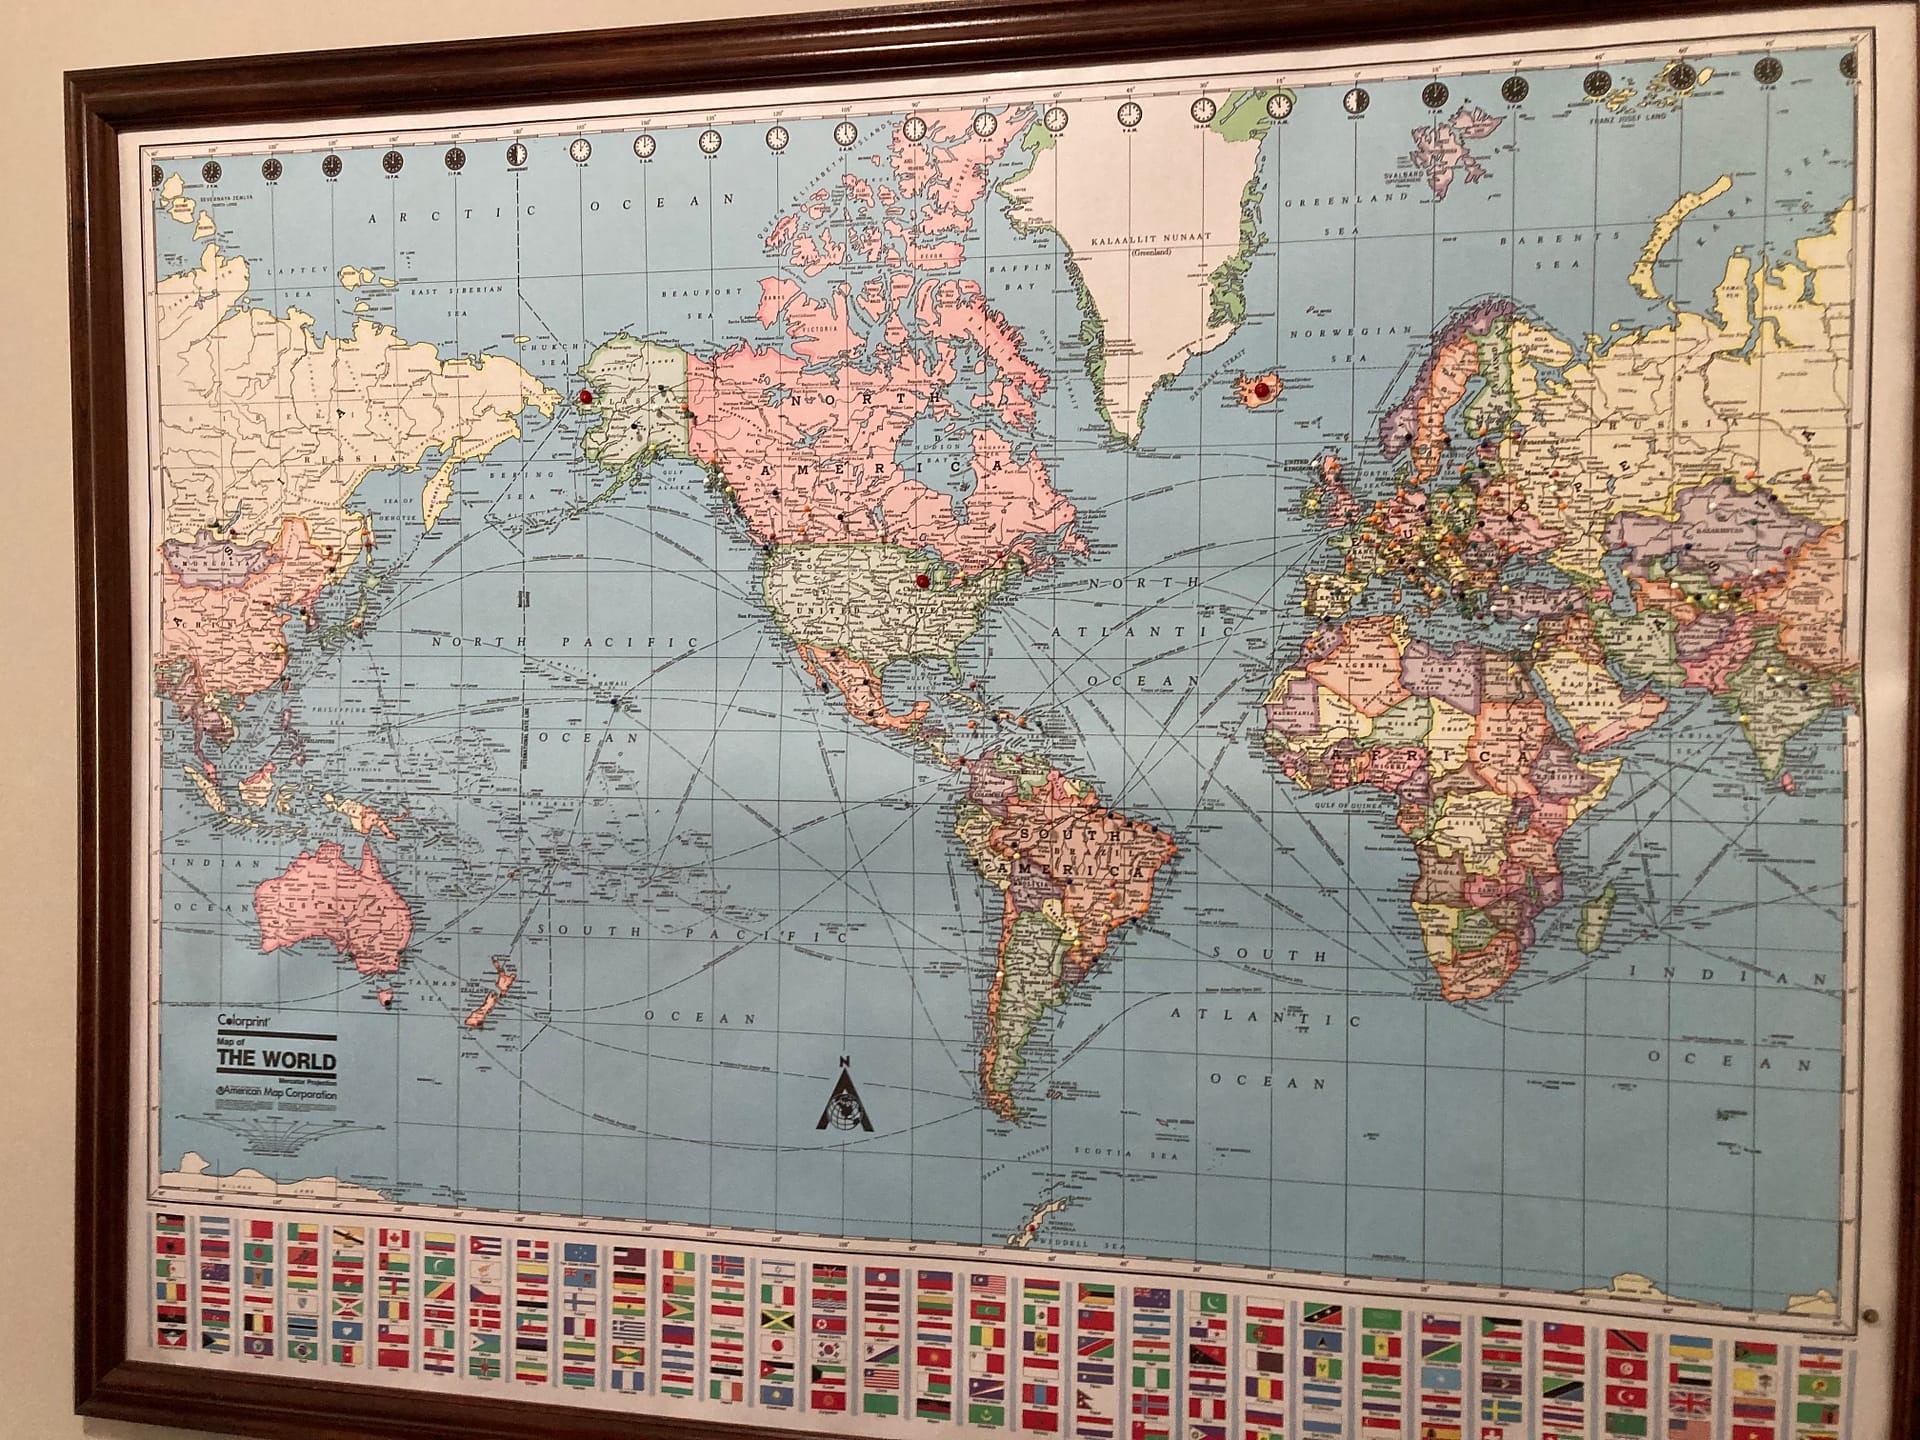 Photo of a world map in the Hopes’ room with pushpins showing where they have been